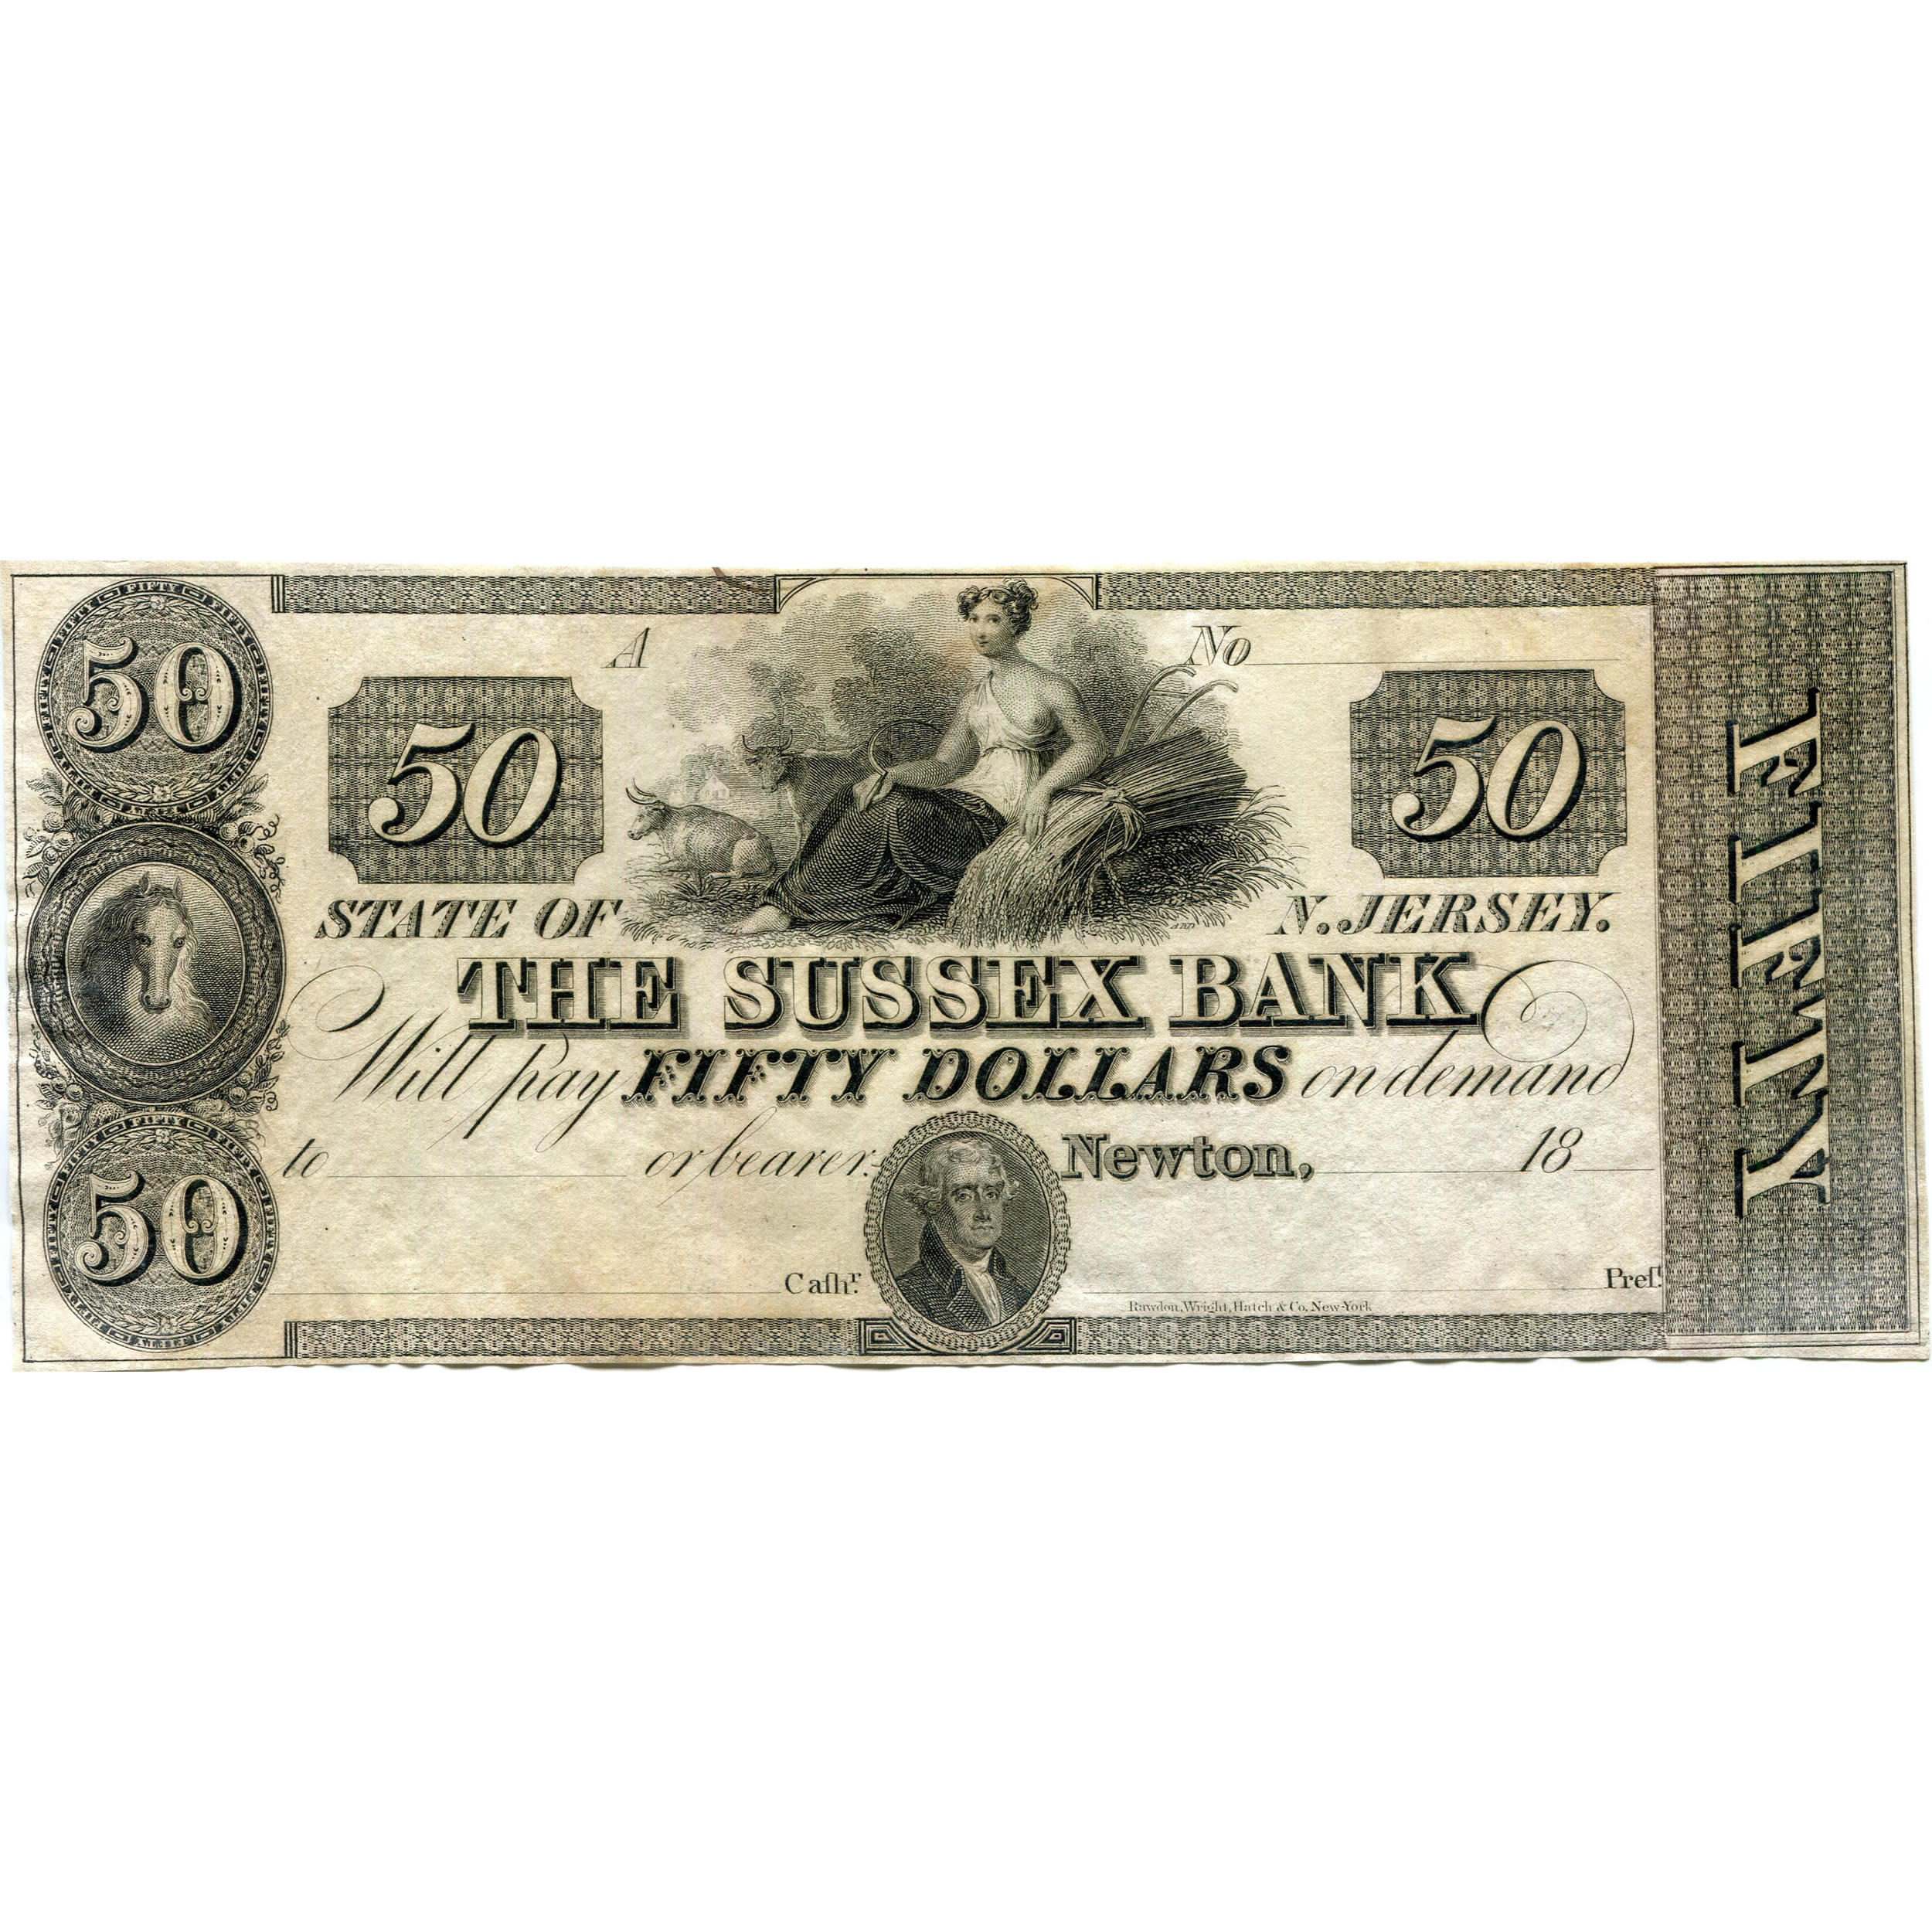 New Jersey Newton 1830s $50 The Sussex Bank NJ-390 G50 UNC